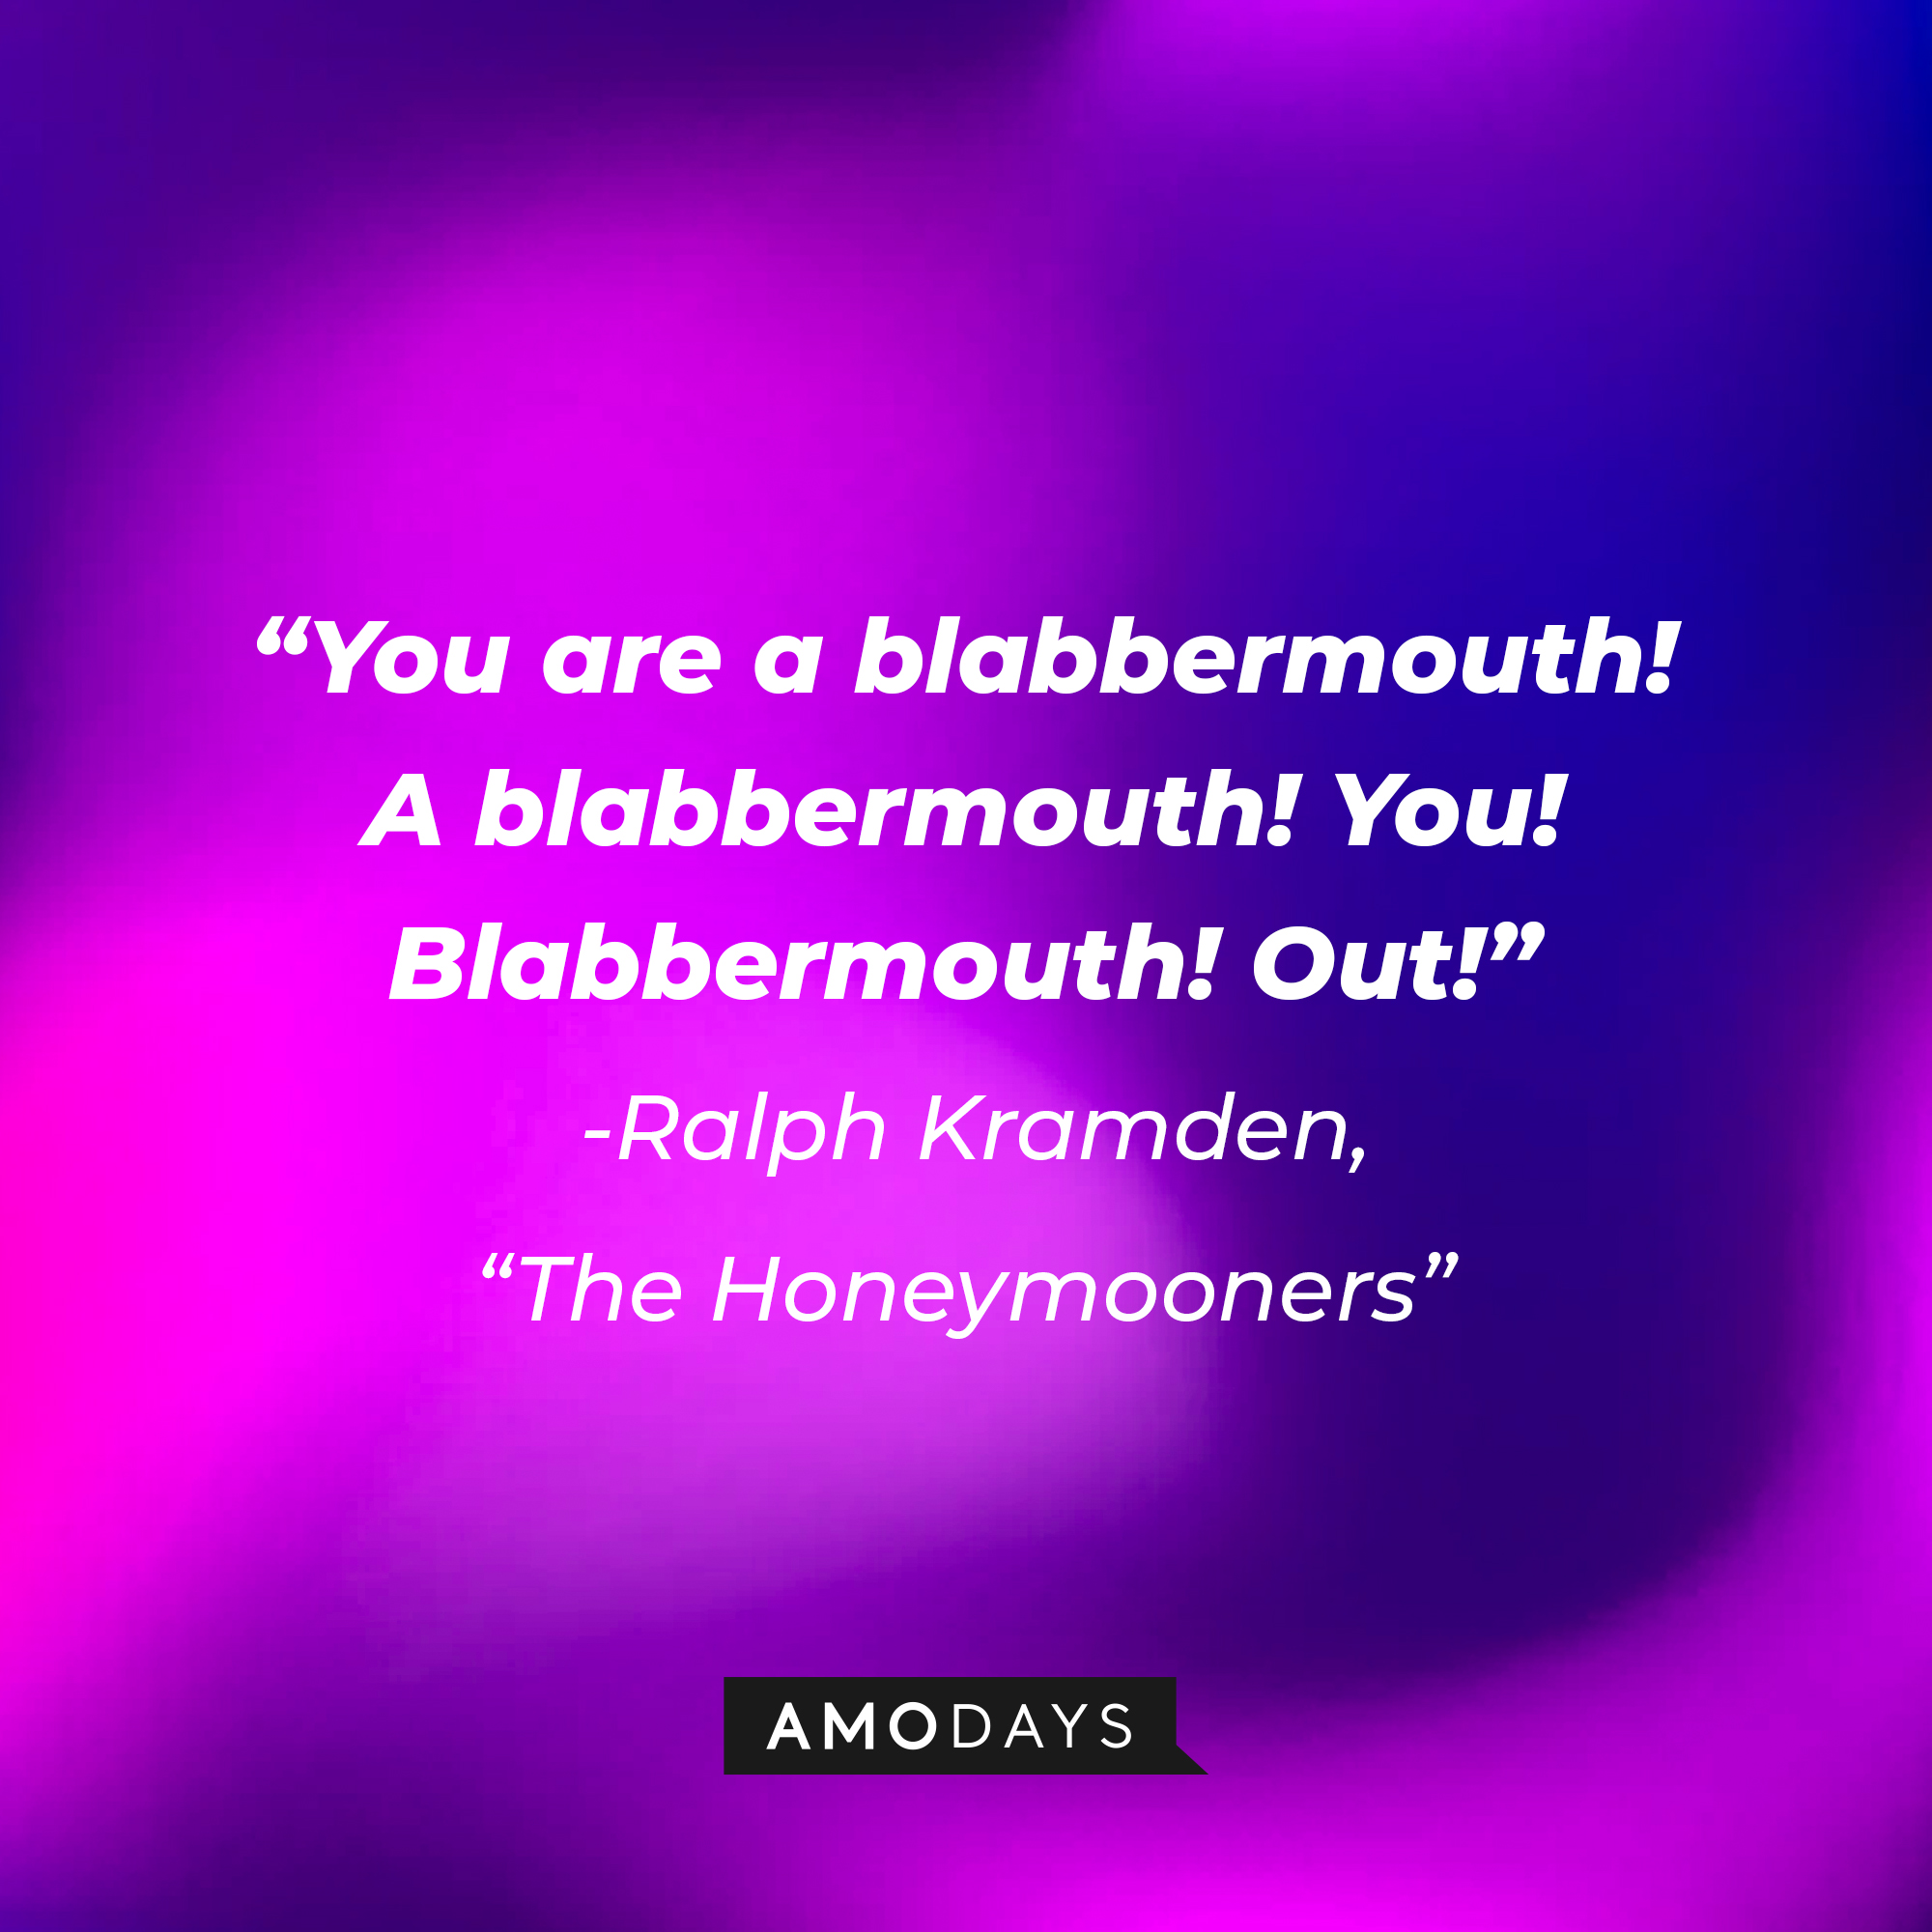 A quote from "The Honeymooners" star Ralph Kramden: "You are a blabbermouth! A blabbermouth! You! Blabbermouth! Out!" | Source: AmoDays